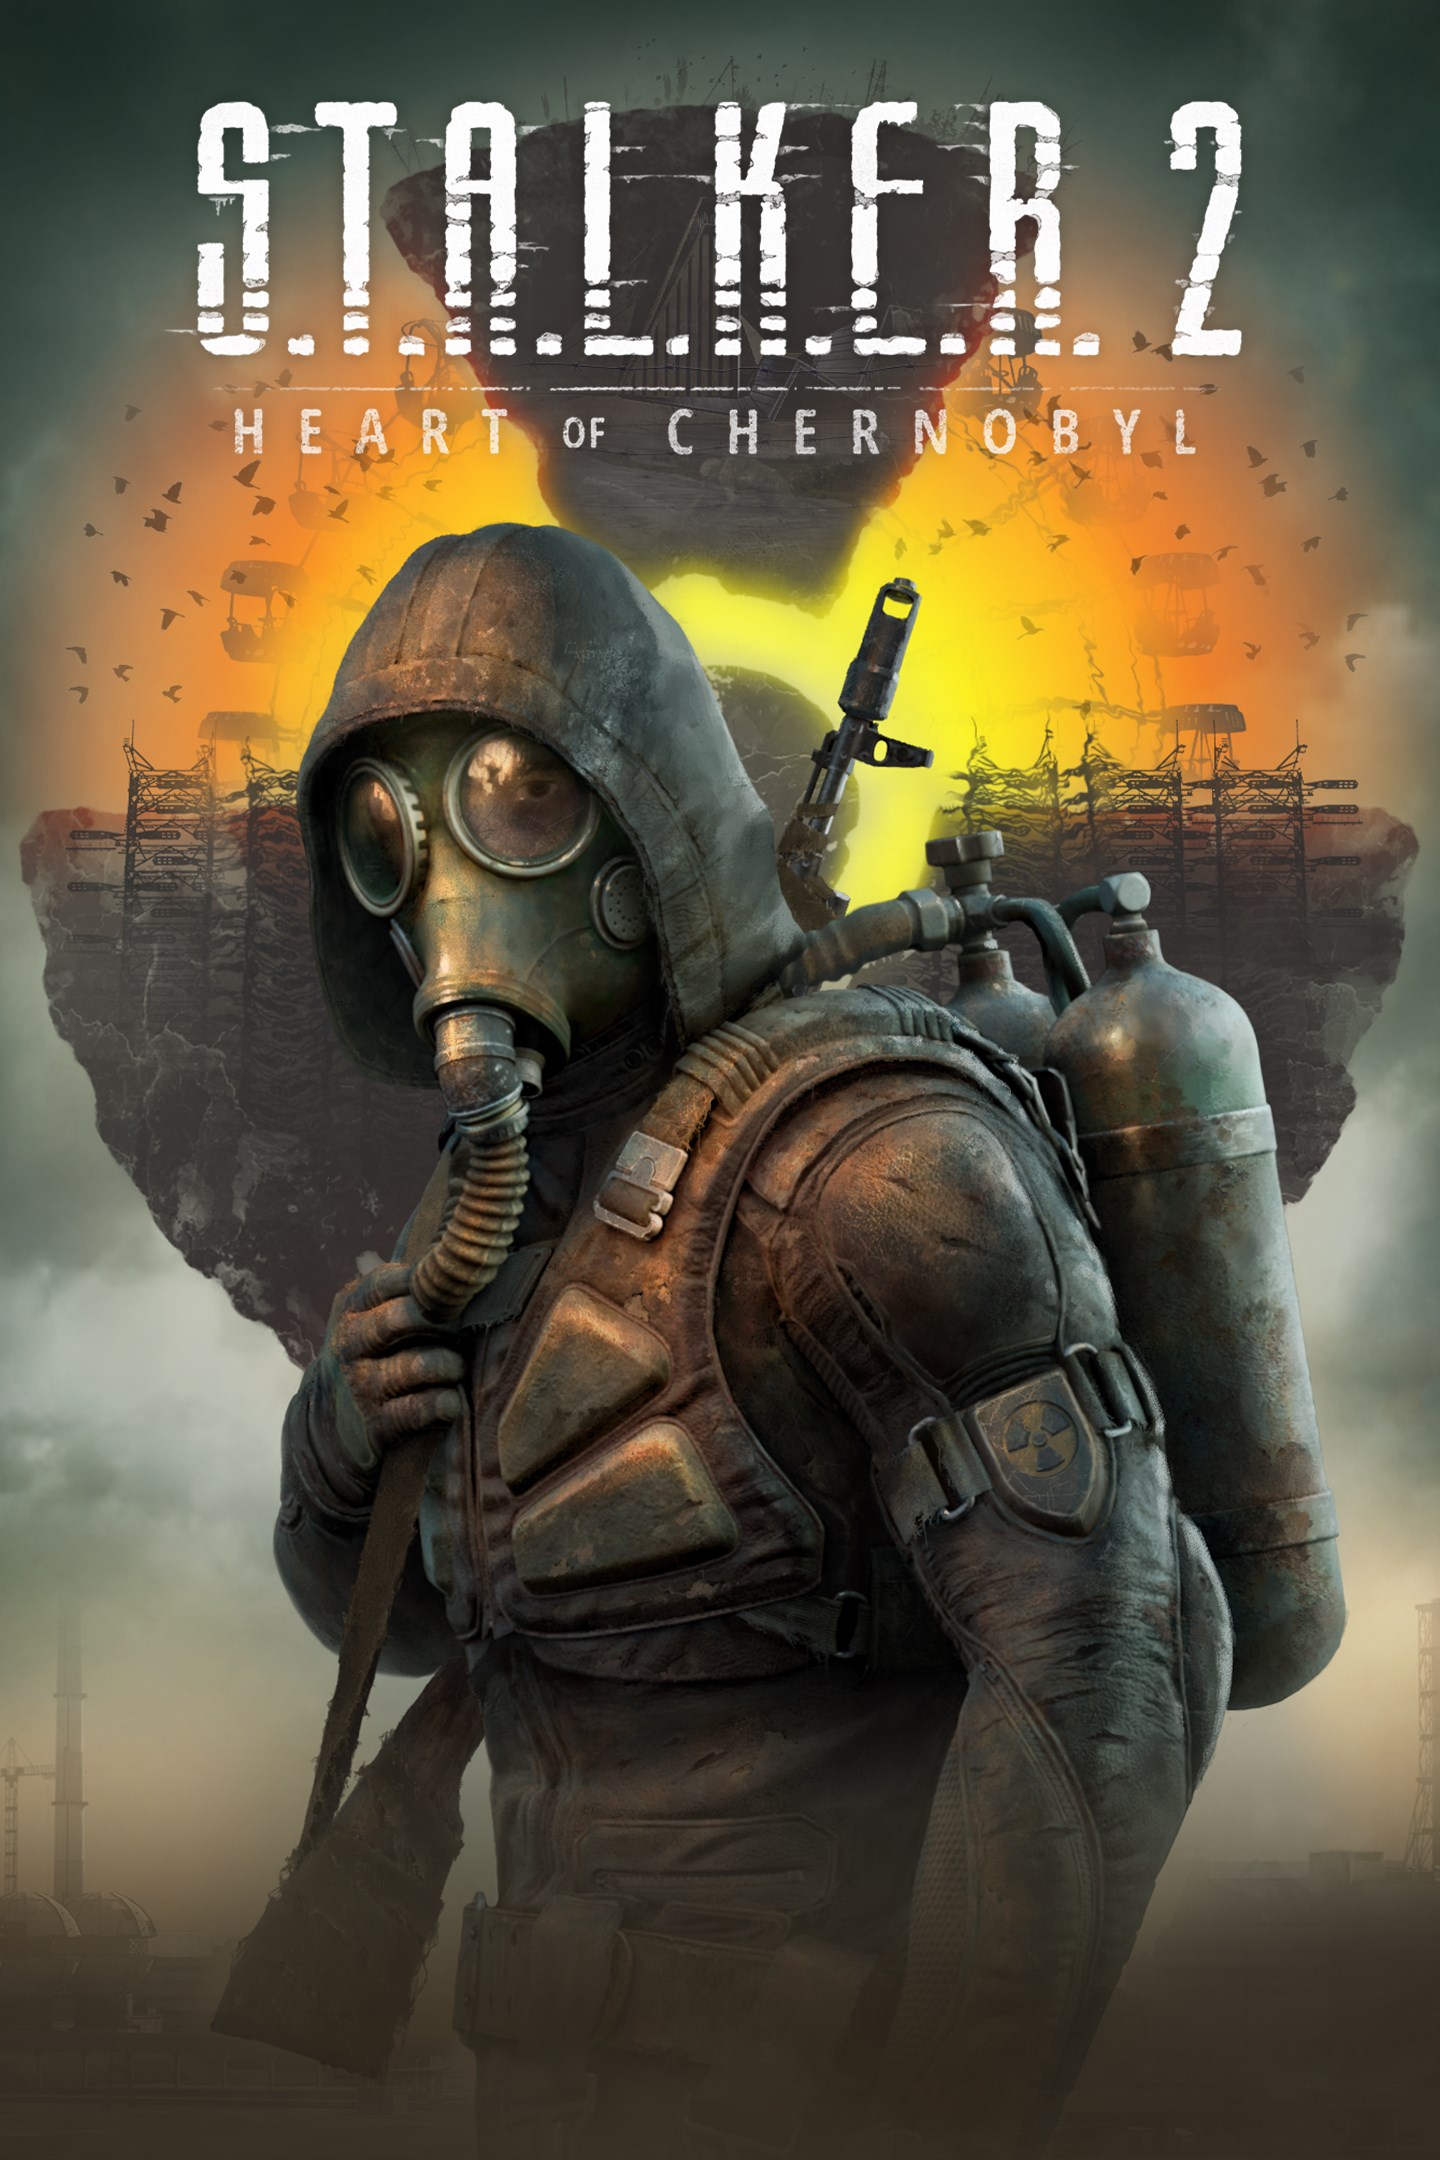 S.T.A.L.K.E.R-SHADOW OF CHERNOBYL